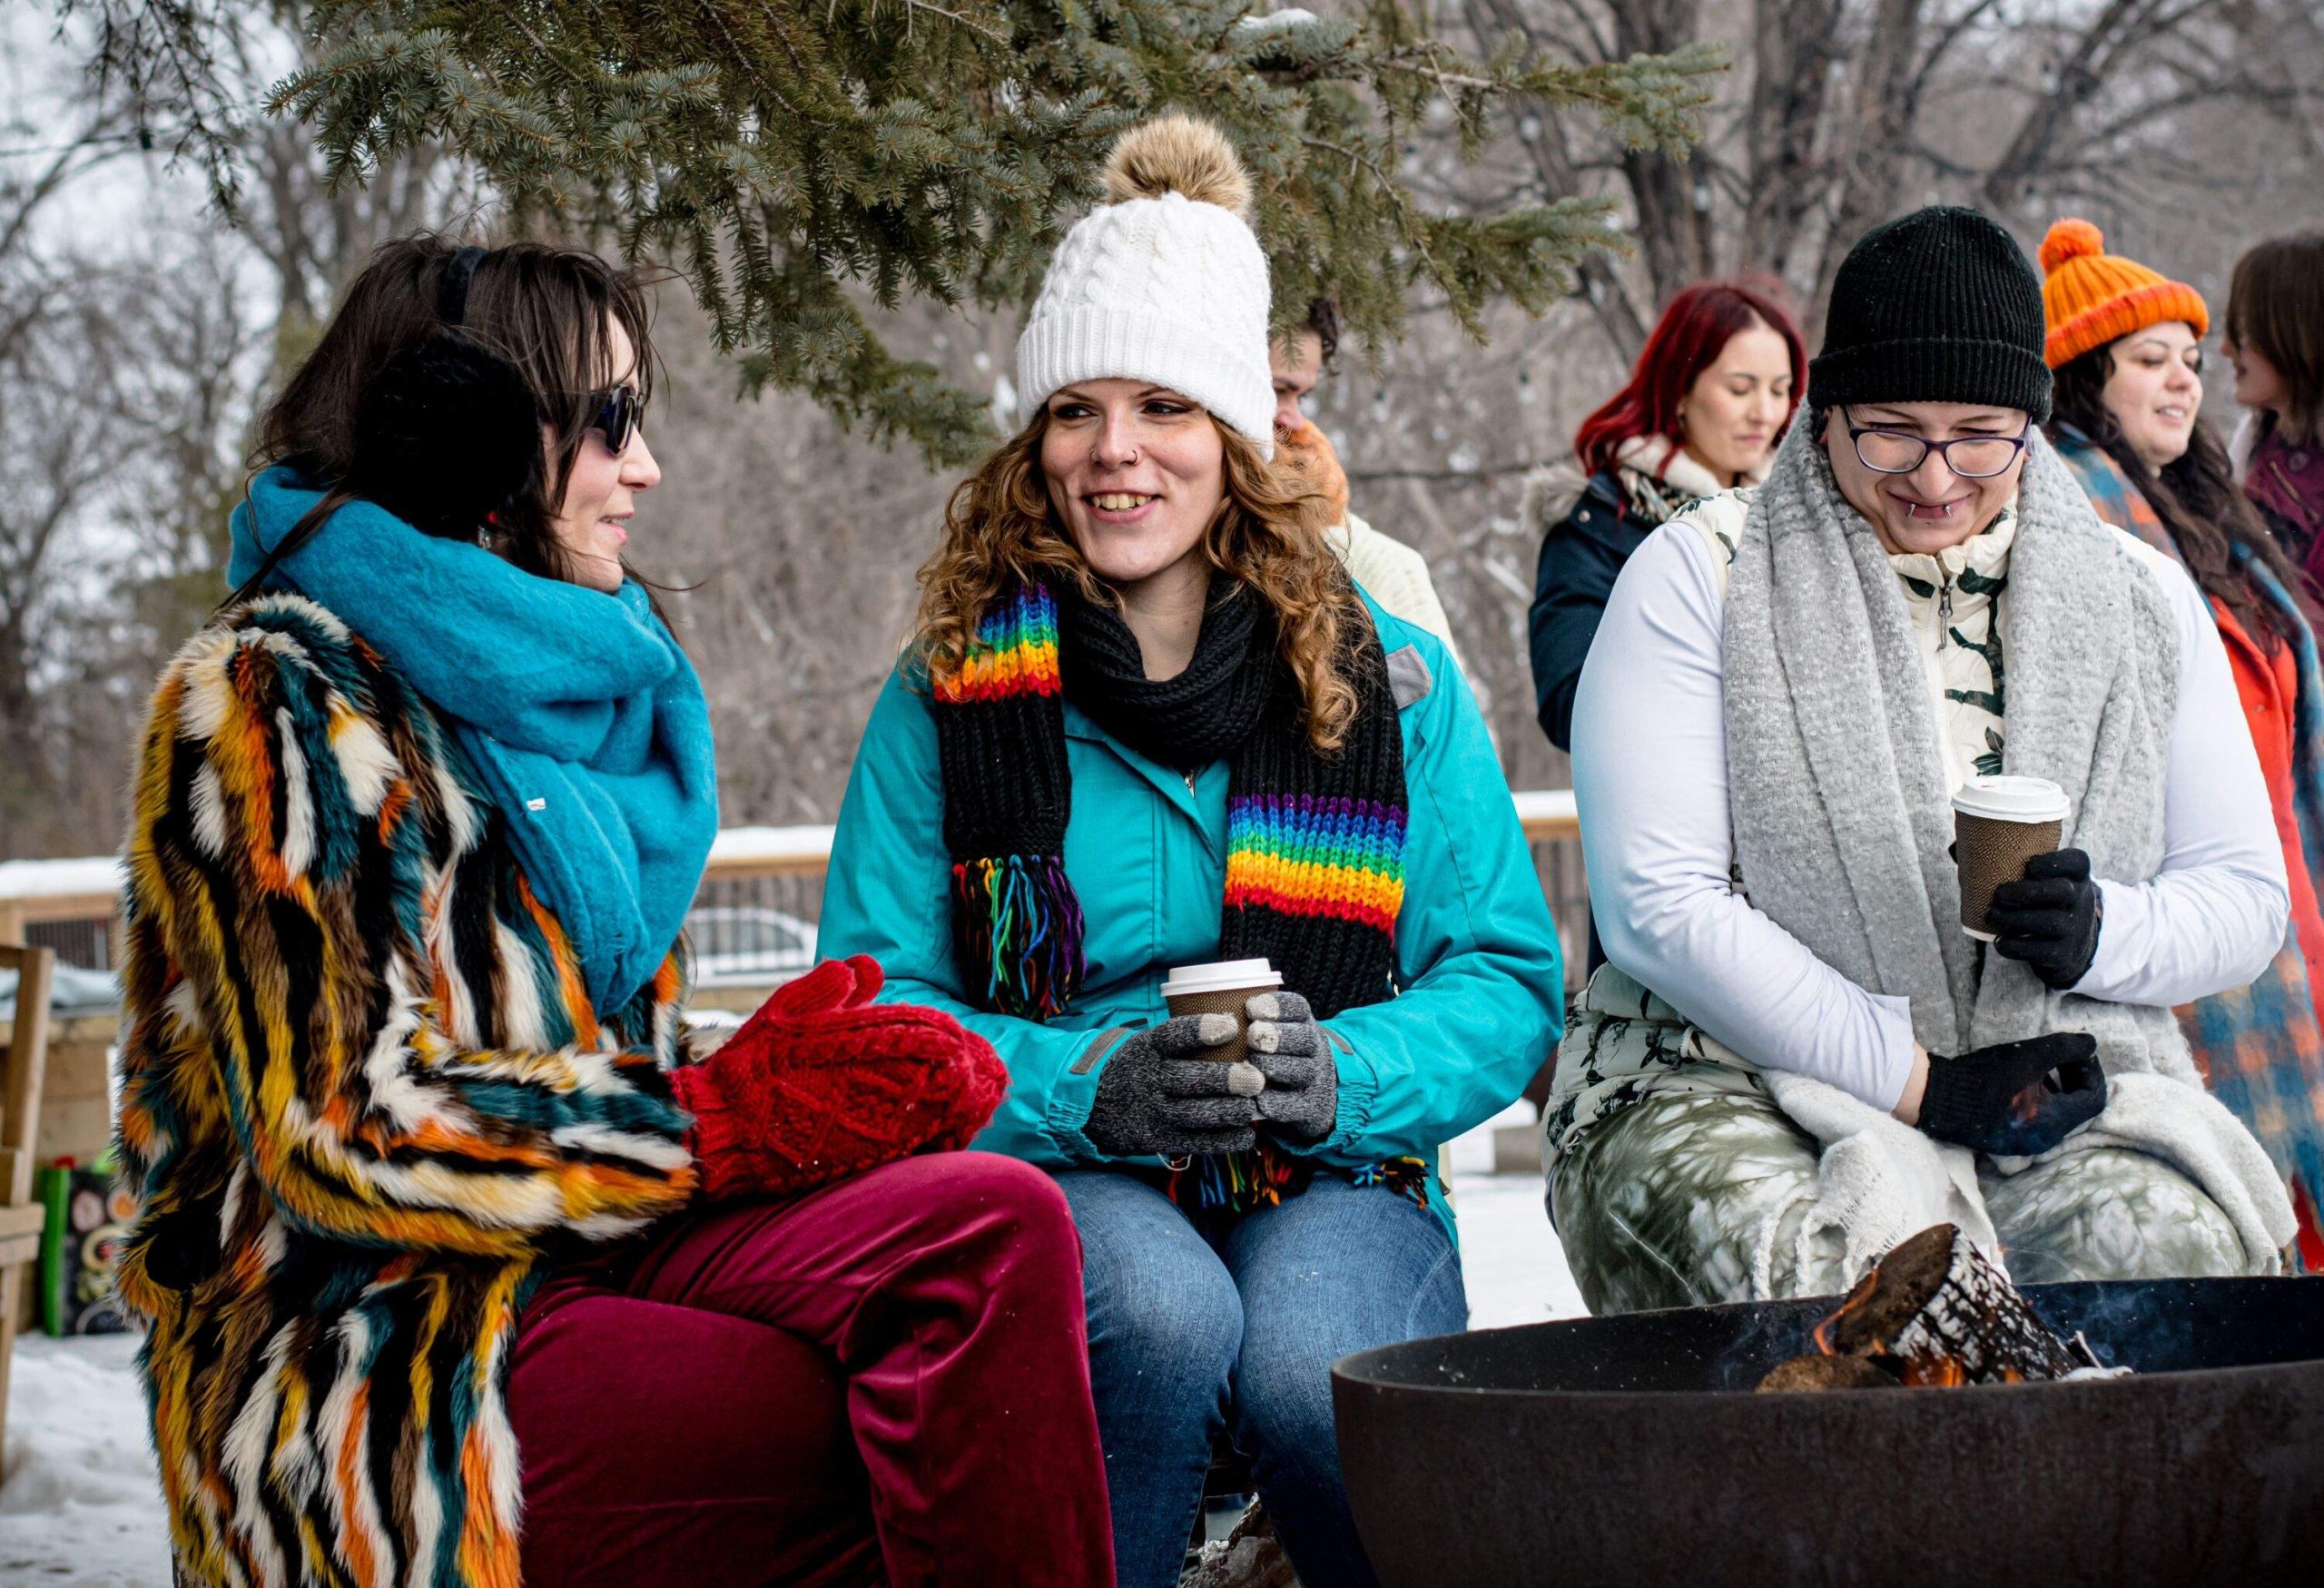 Amidst the winter chill, trans women and their nonbinary neurodivergent friend gather by the fireside, each holding a cup of cocoaâa chosen family of unity and shared warmth in the season's embrace.